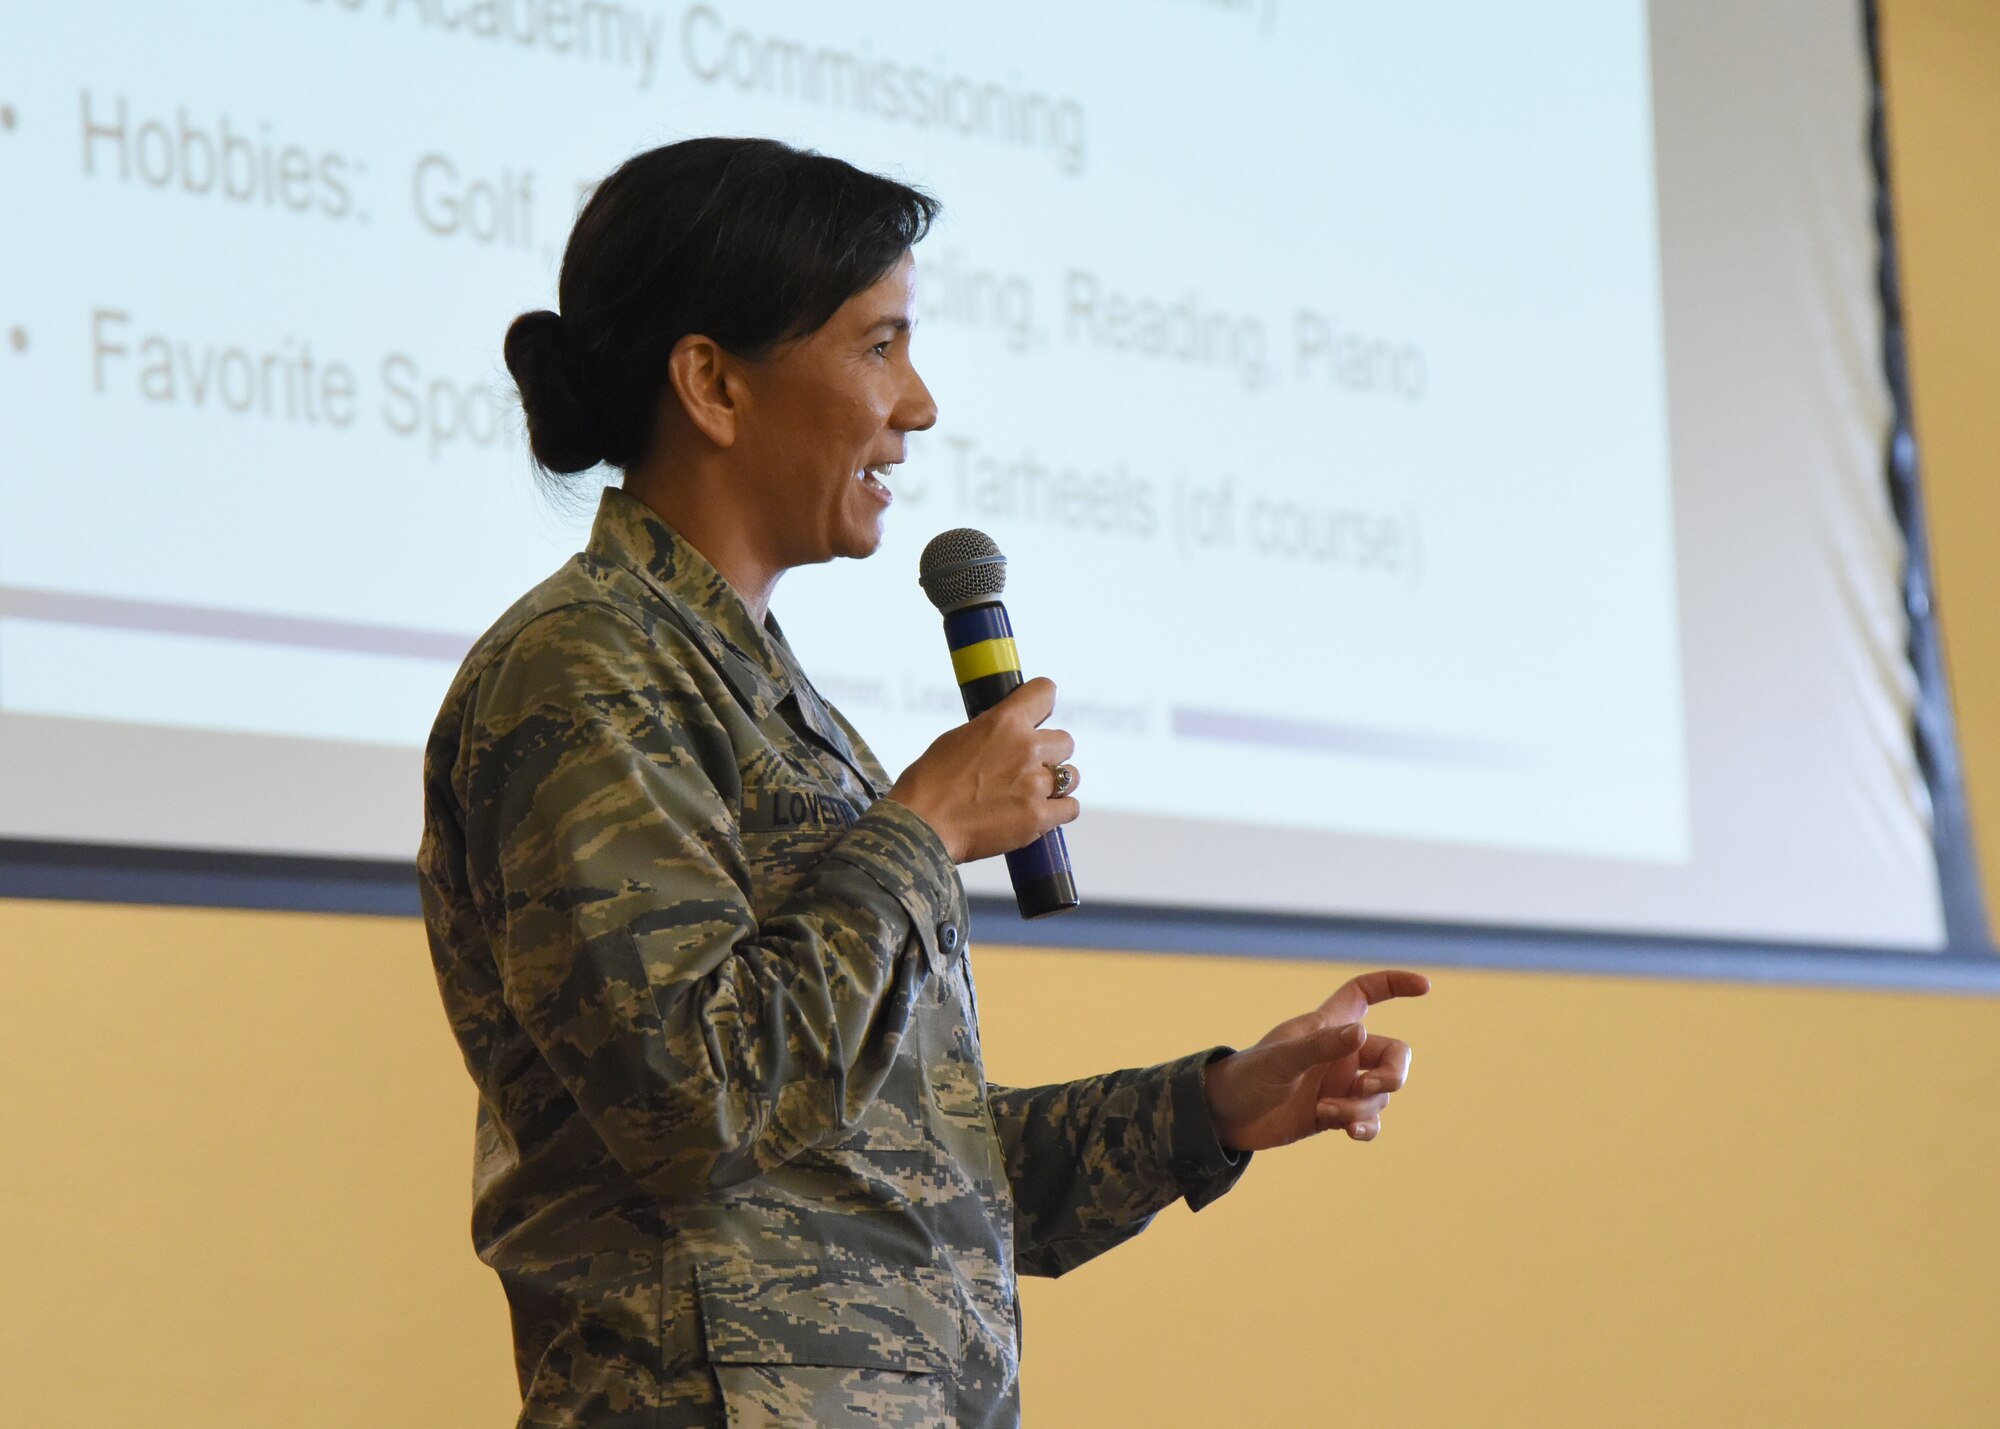 Col. Debra Lovette, 81st Training Wing commander, speaks to attendees during a Commanders Call in the Bay Breeze Event Center June 12, 2017, on Keesler Air Force Base, Miss. The Commander’s Call was one of several Wingman Week events focusing on resiliency and teambuilding initiatives across the base. (U.S. Air Force photo by Kemberly Groue)